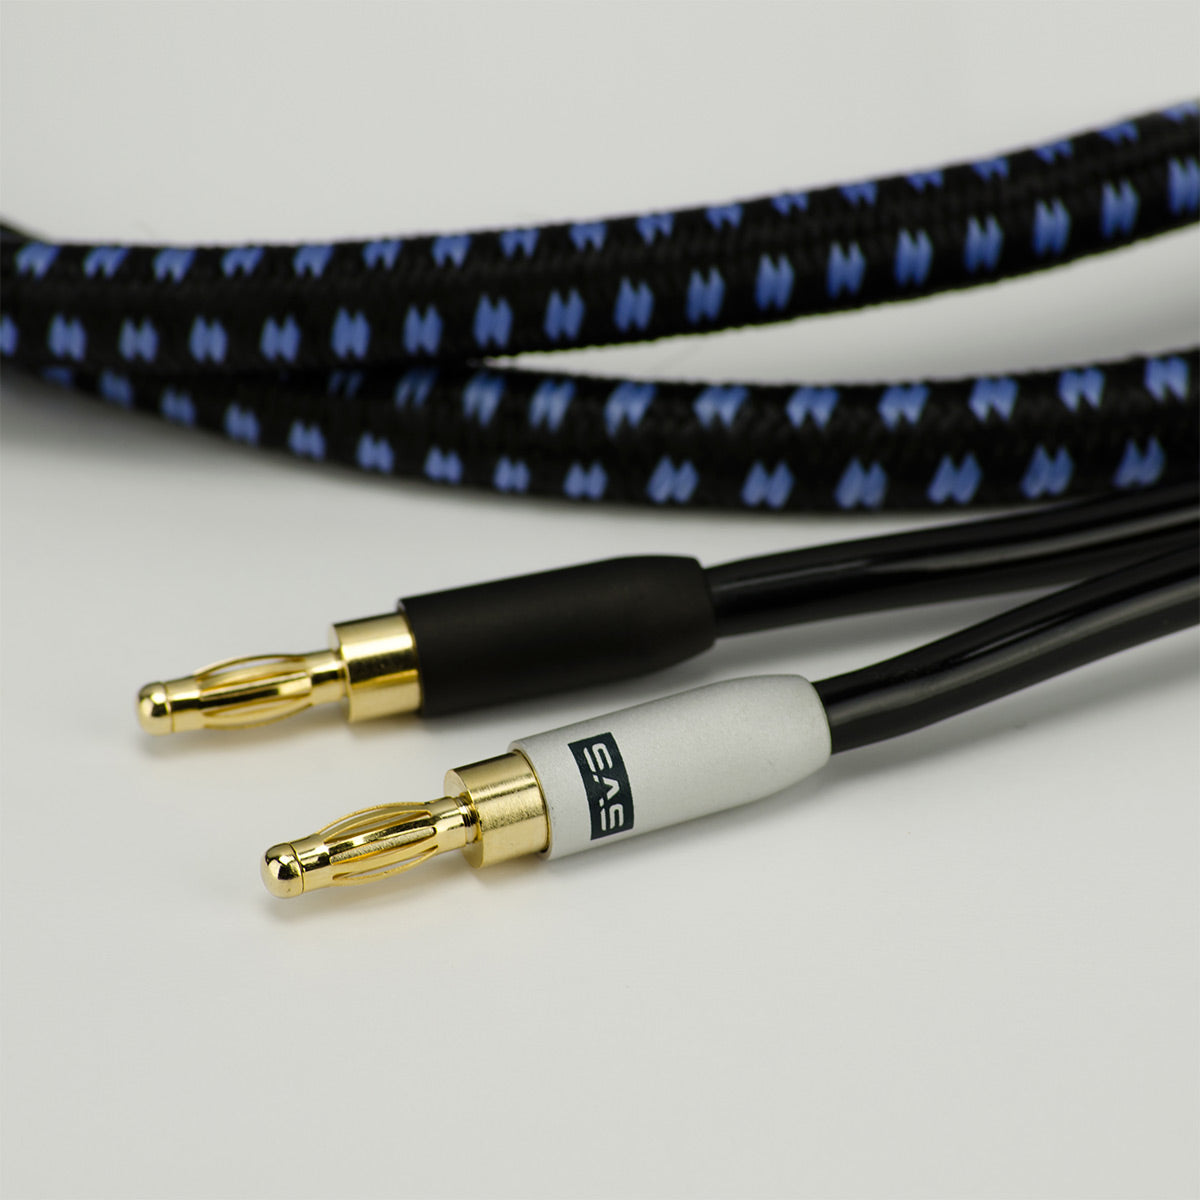 SVS SoundPath Ultra Speaker Cable - 25 ft. (7.62m) - Each